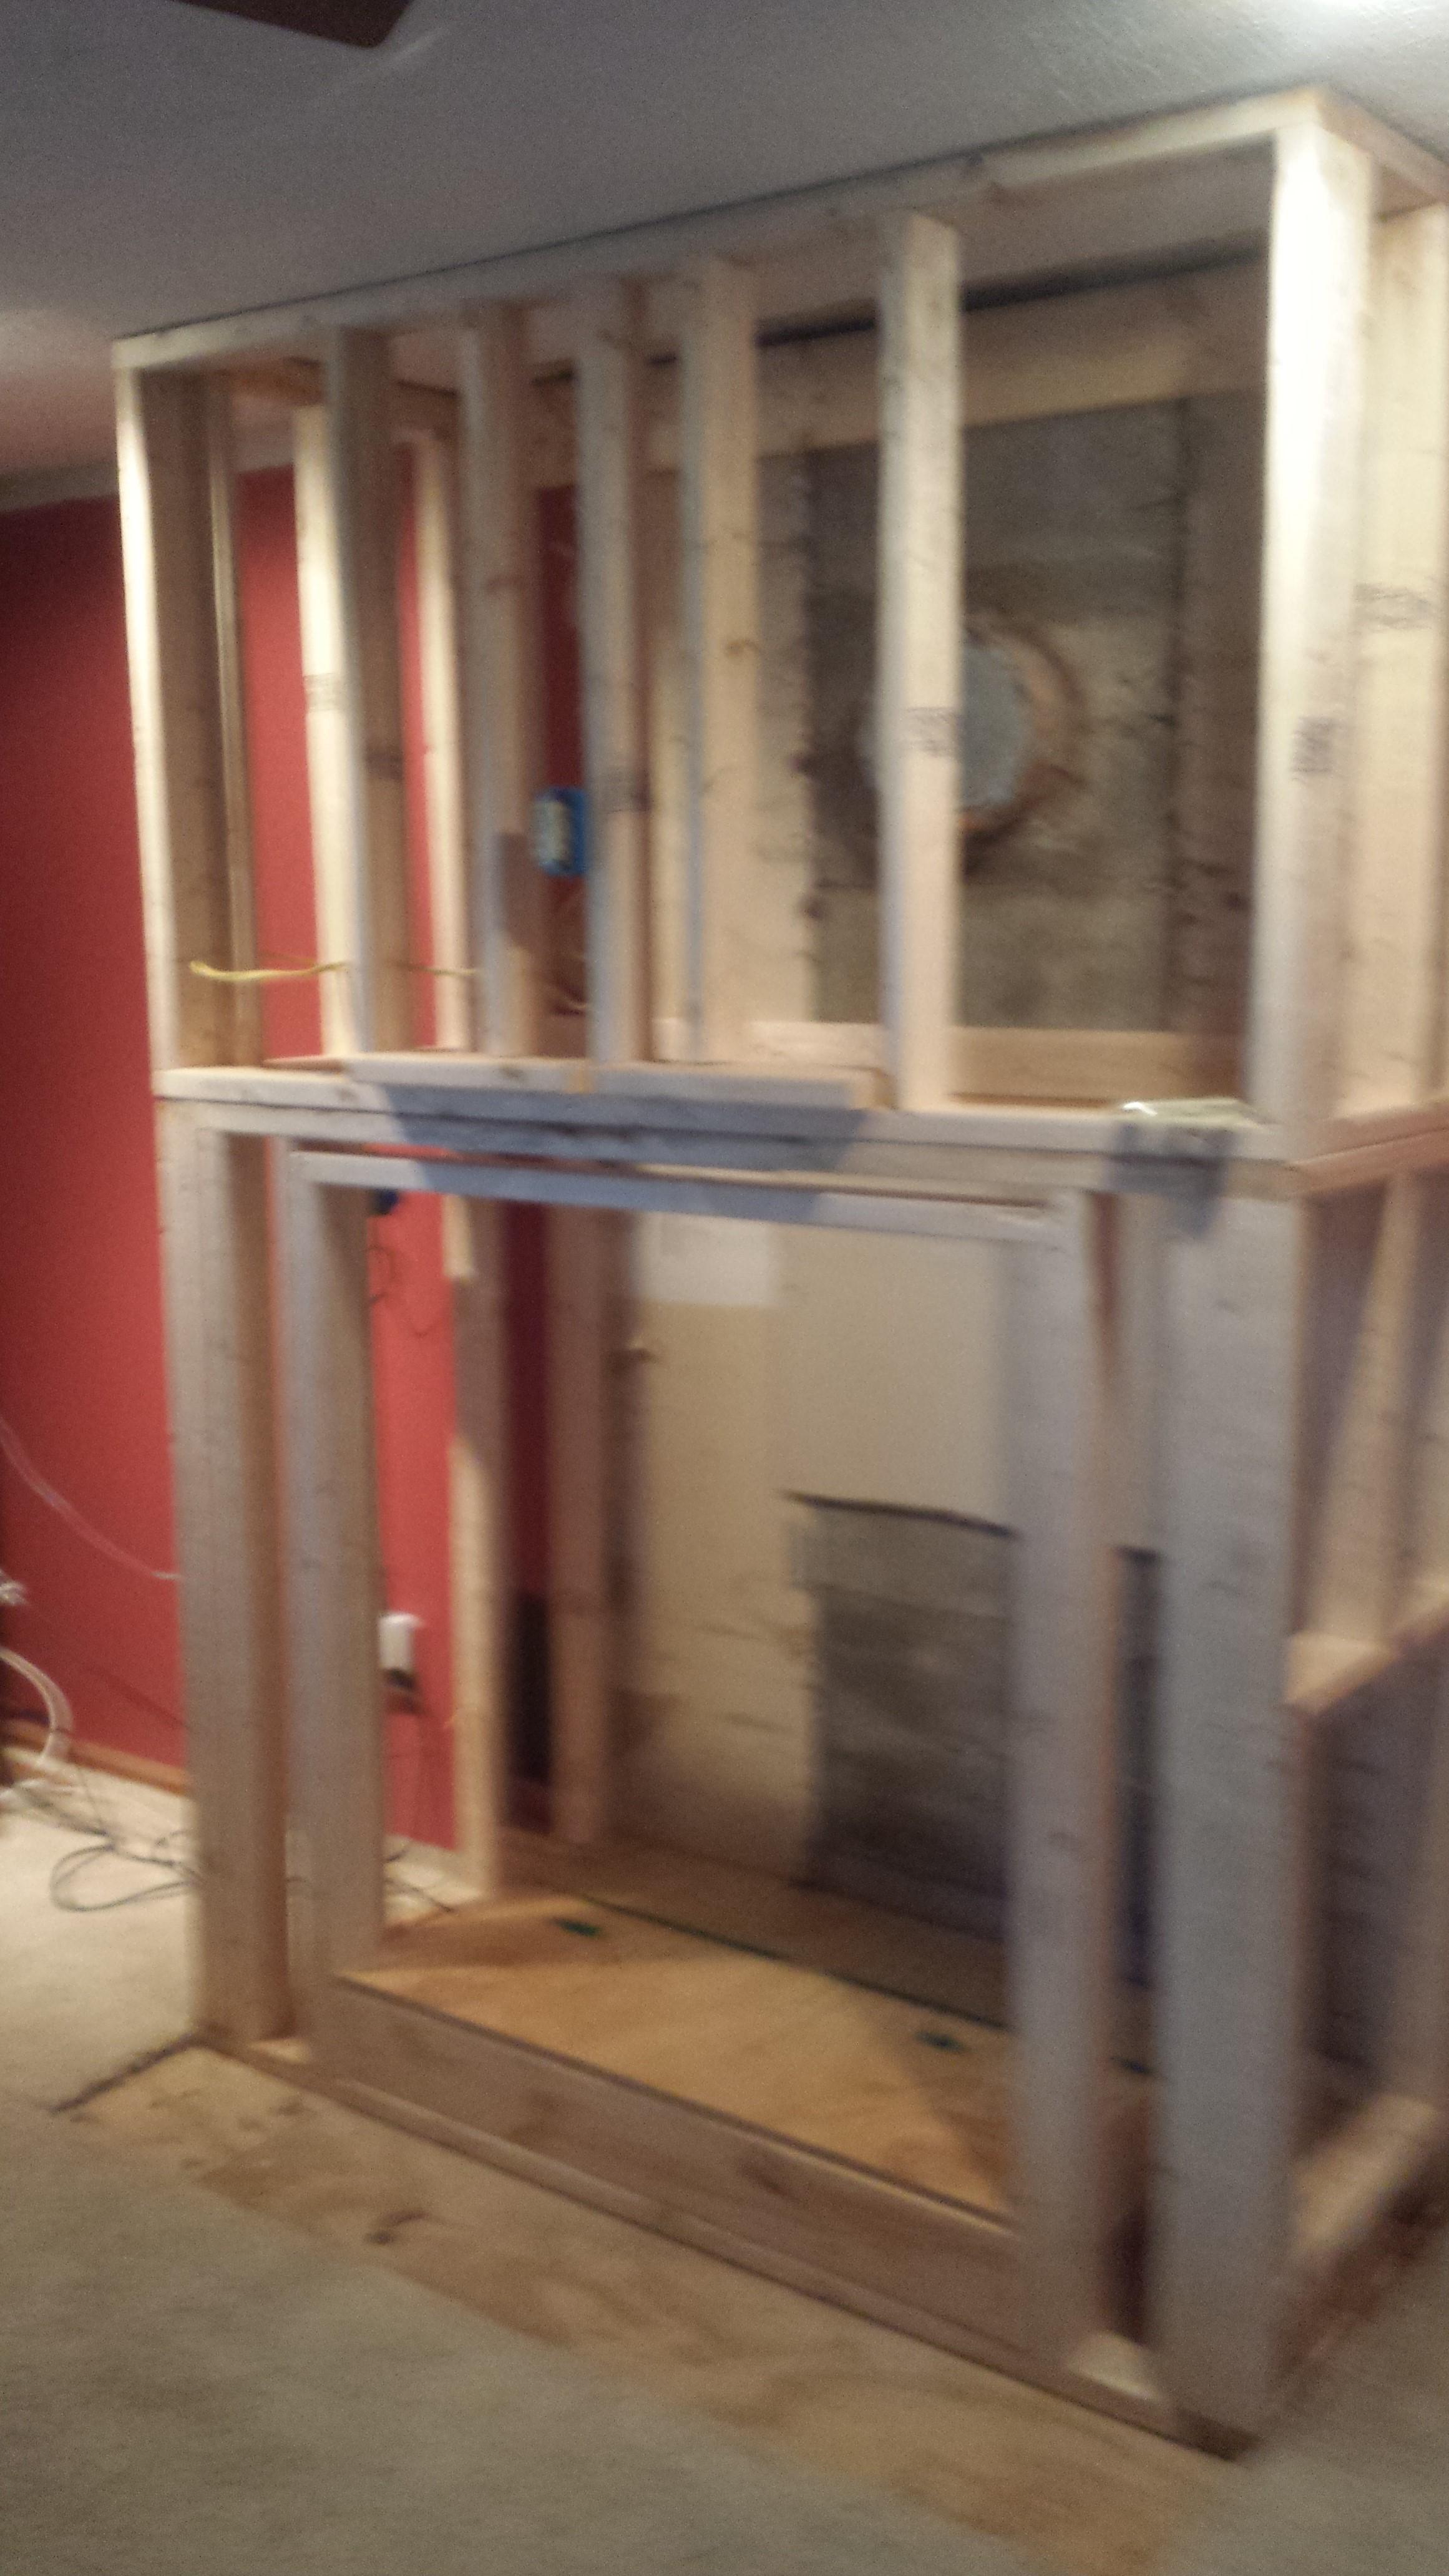 This is stage 1 of installing wood burning insert